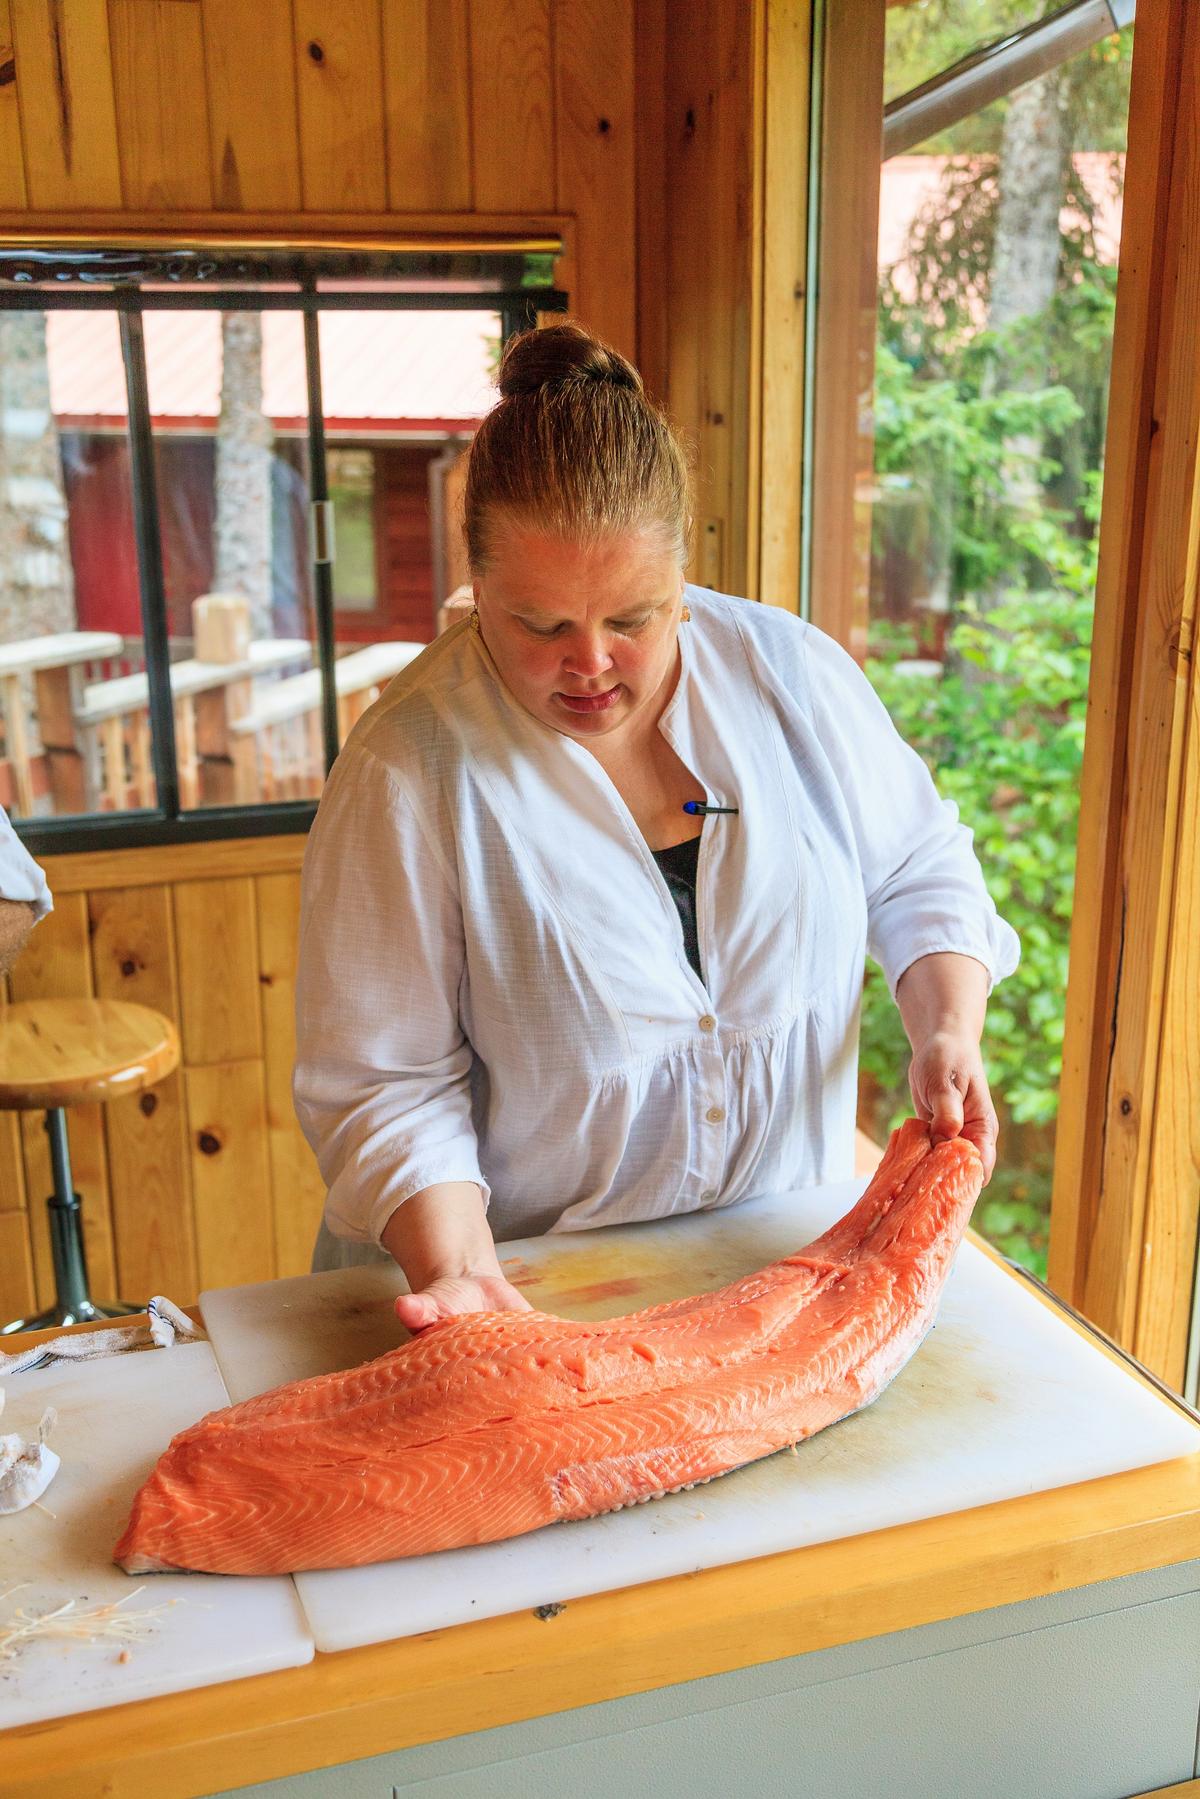 Co-owner and chef Kirsten Dixon prepares wild salmon for a cooking class. (Courtesy of Within the Wild)